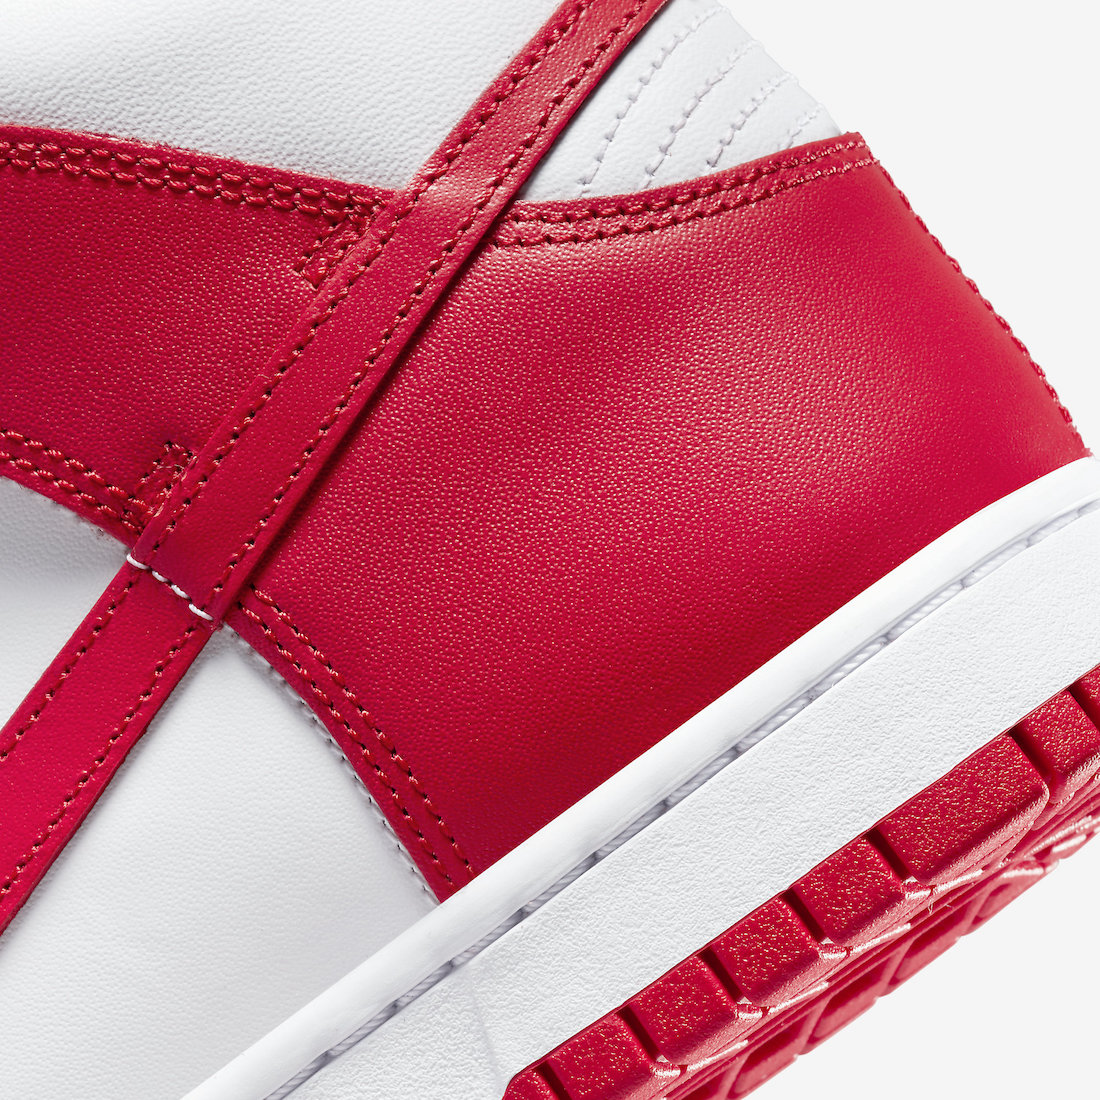 Nike Dunk High White University Red DD1399-106 Release Date